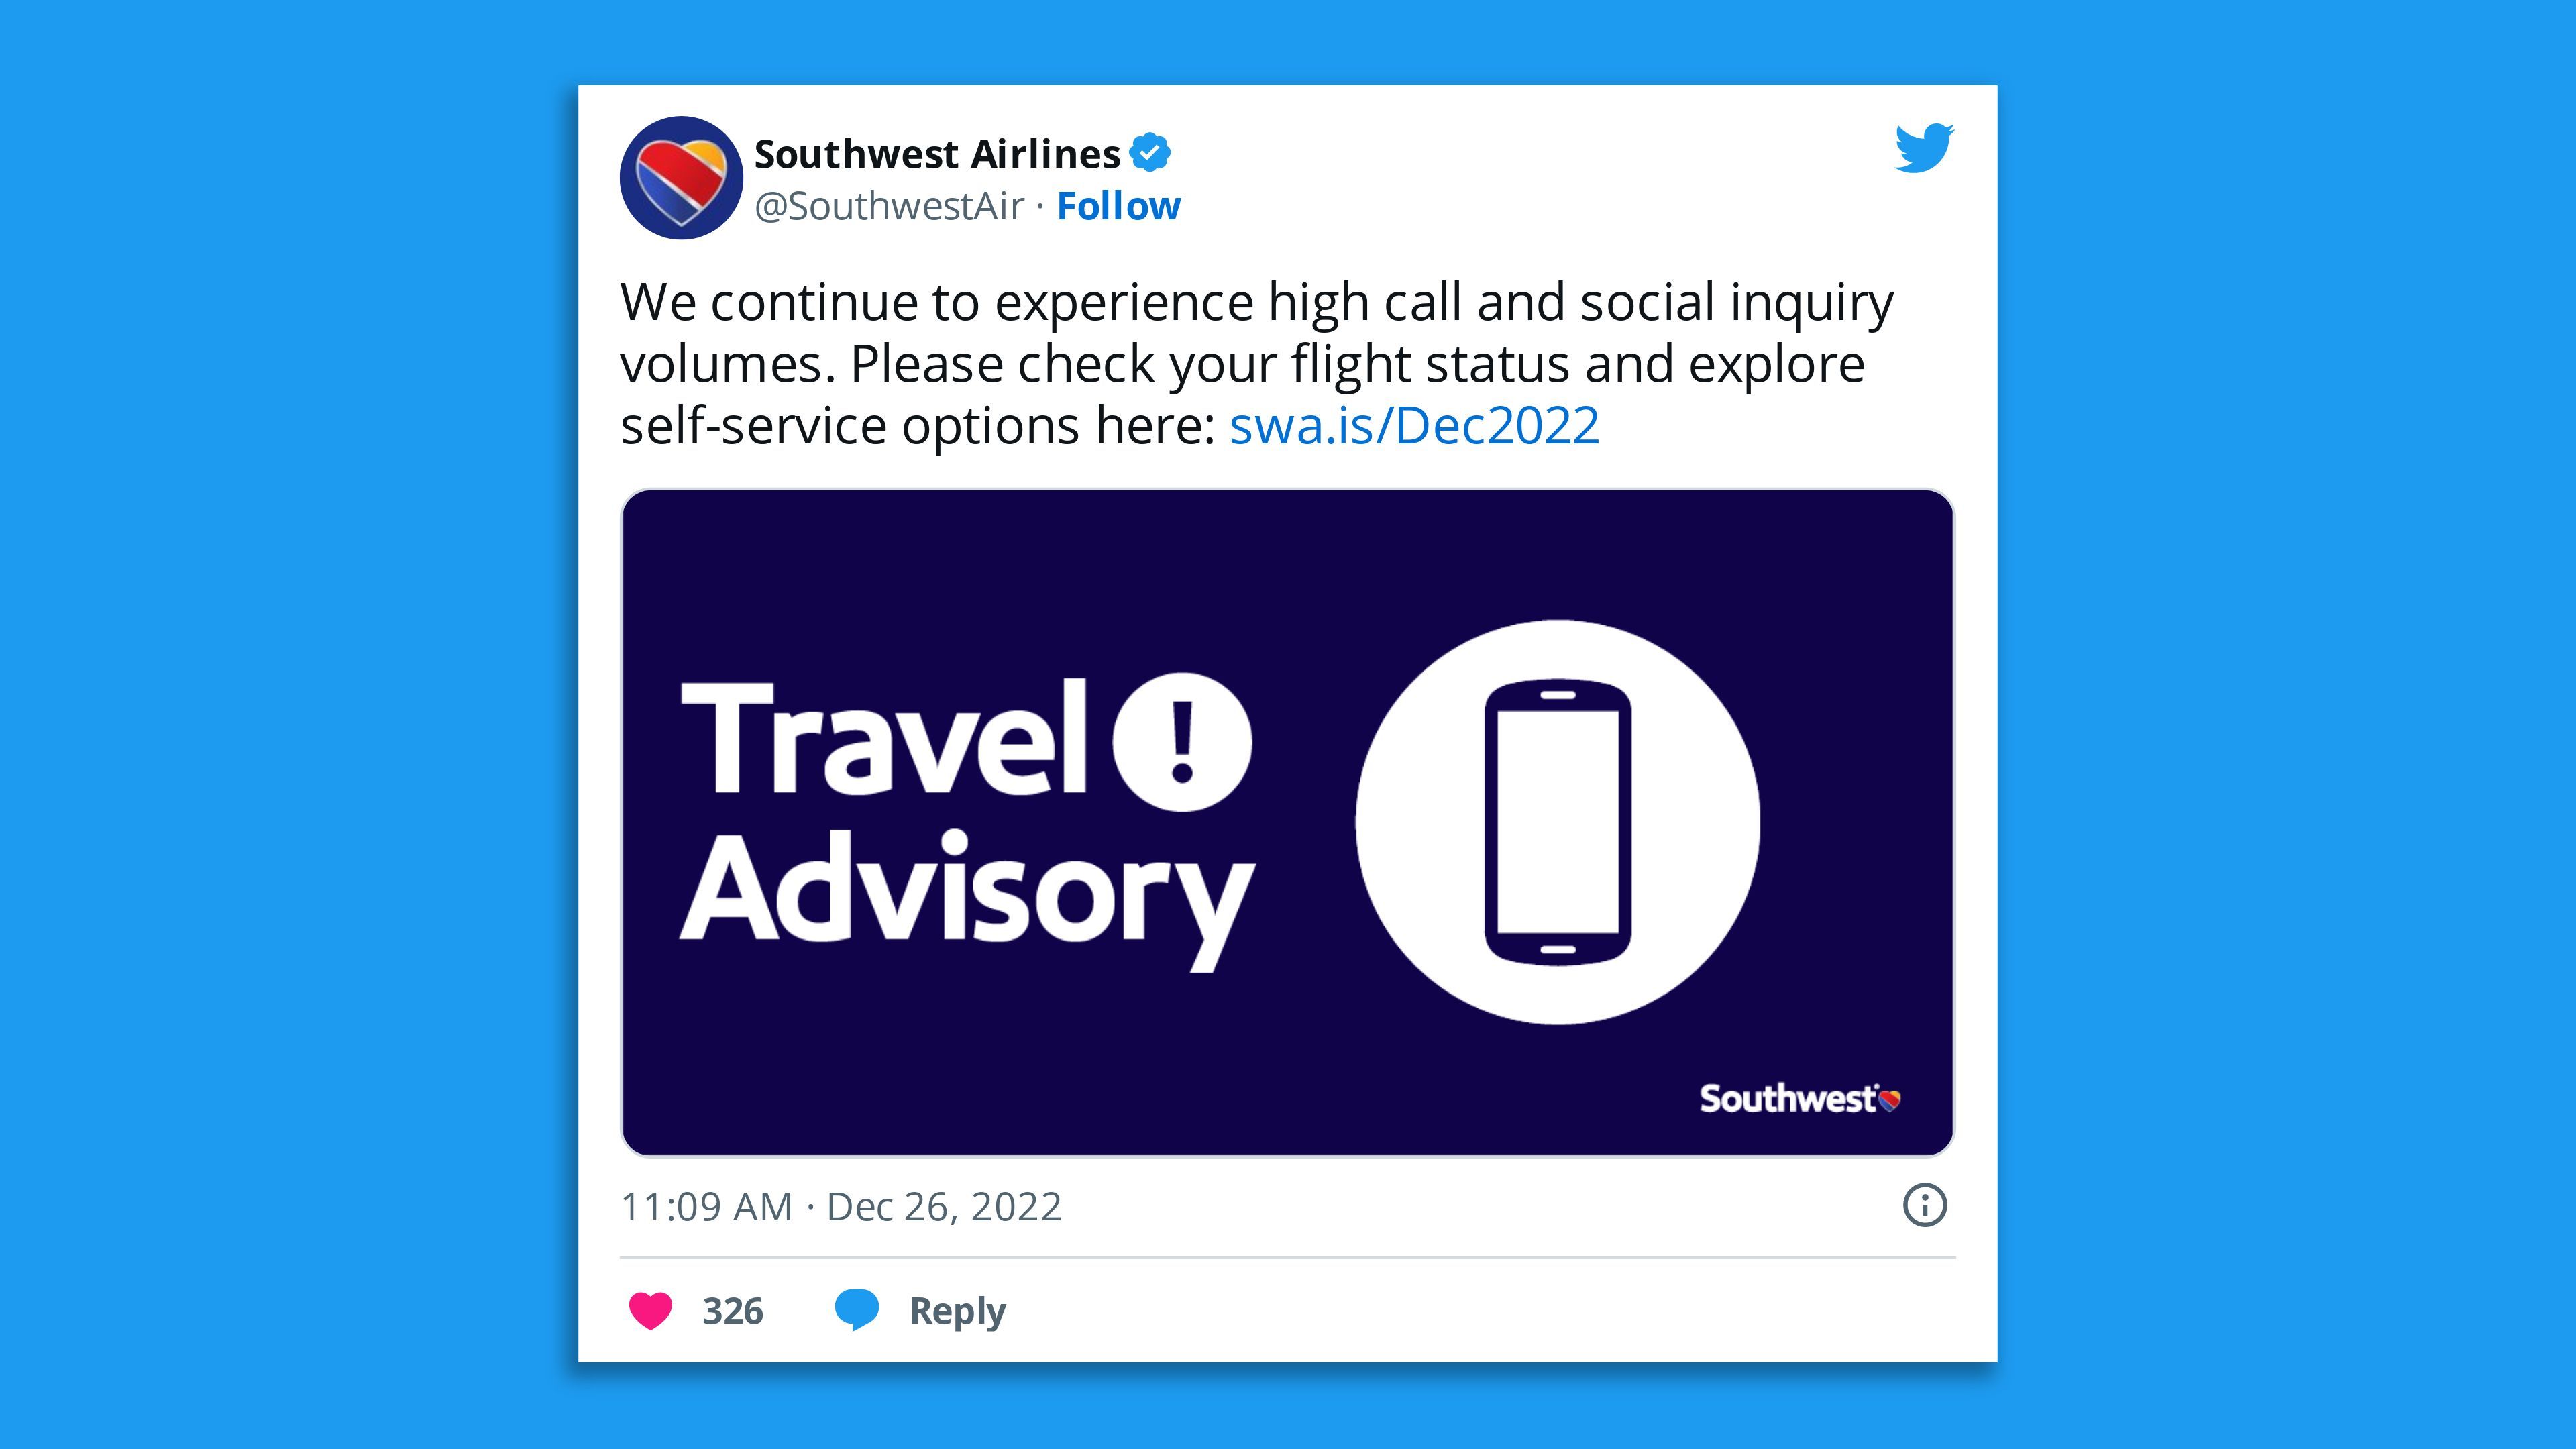 A screenshot of a tweet from Southwest Airlines indicating that they are experiencing high call volumes.